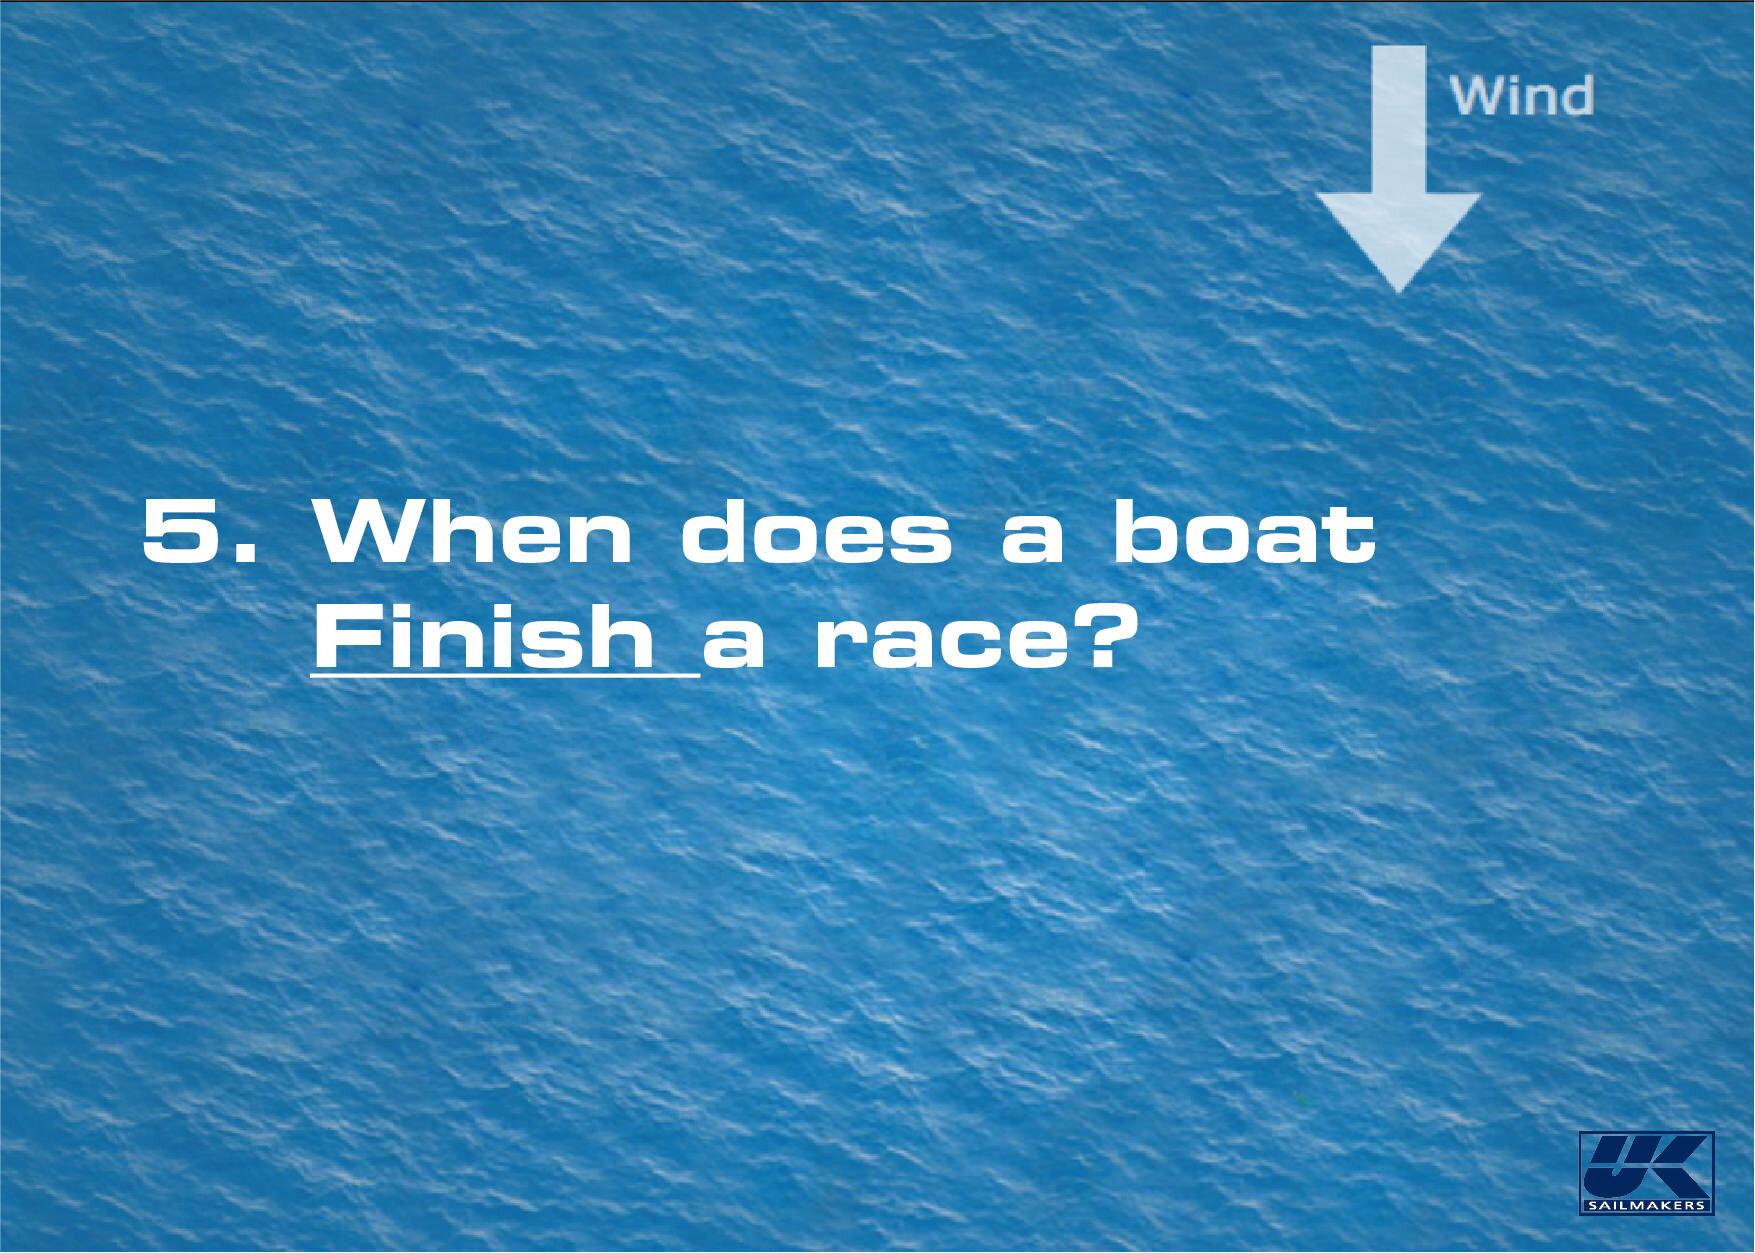 5 When Does a boat finish.jpg